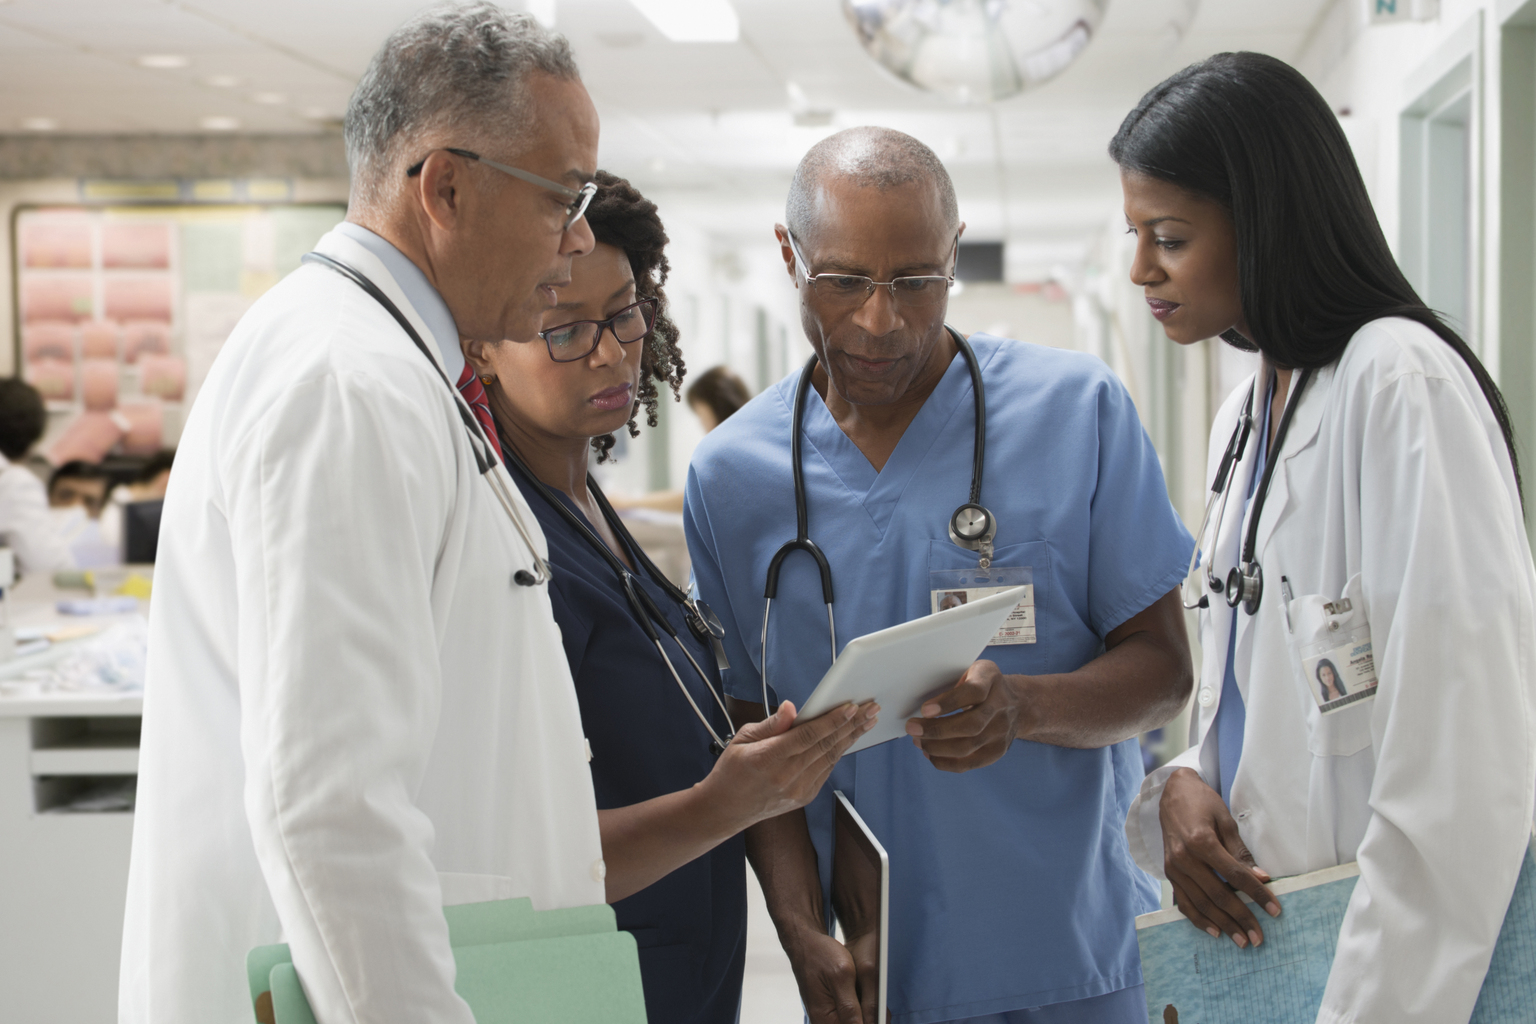 Wolters Kluwer, together with the Black Nurse Collaborative, increases focus on improving advocacy for underrepresented groups in nursing